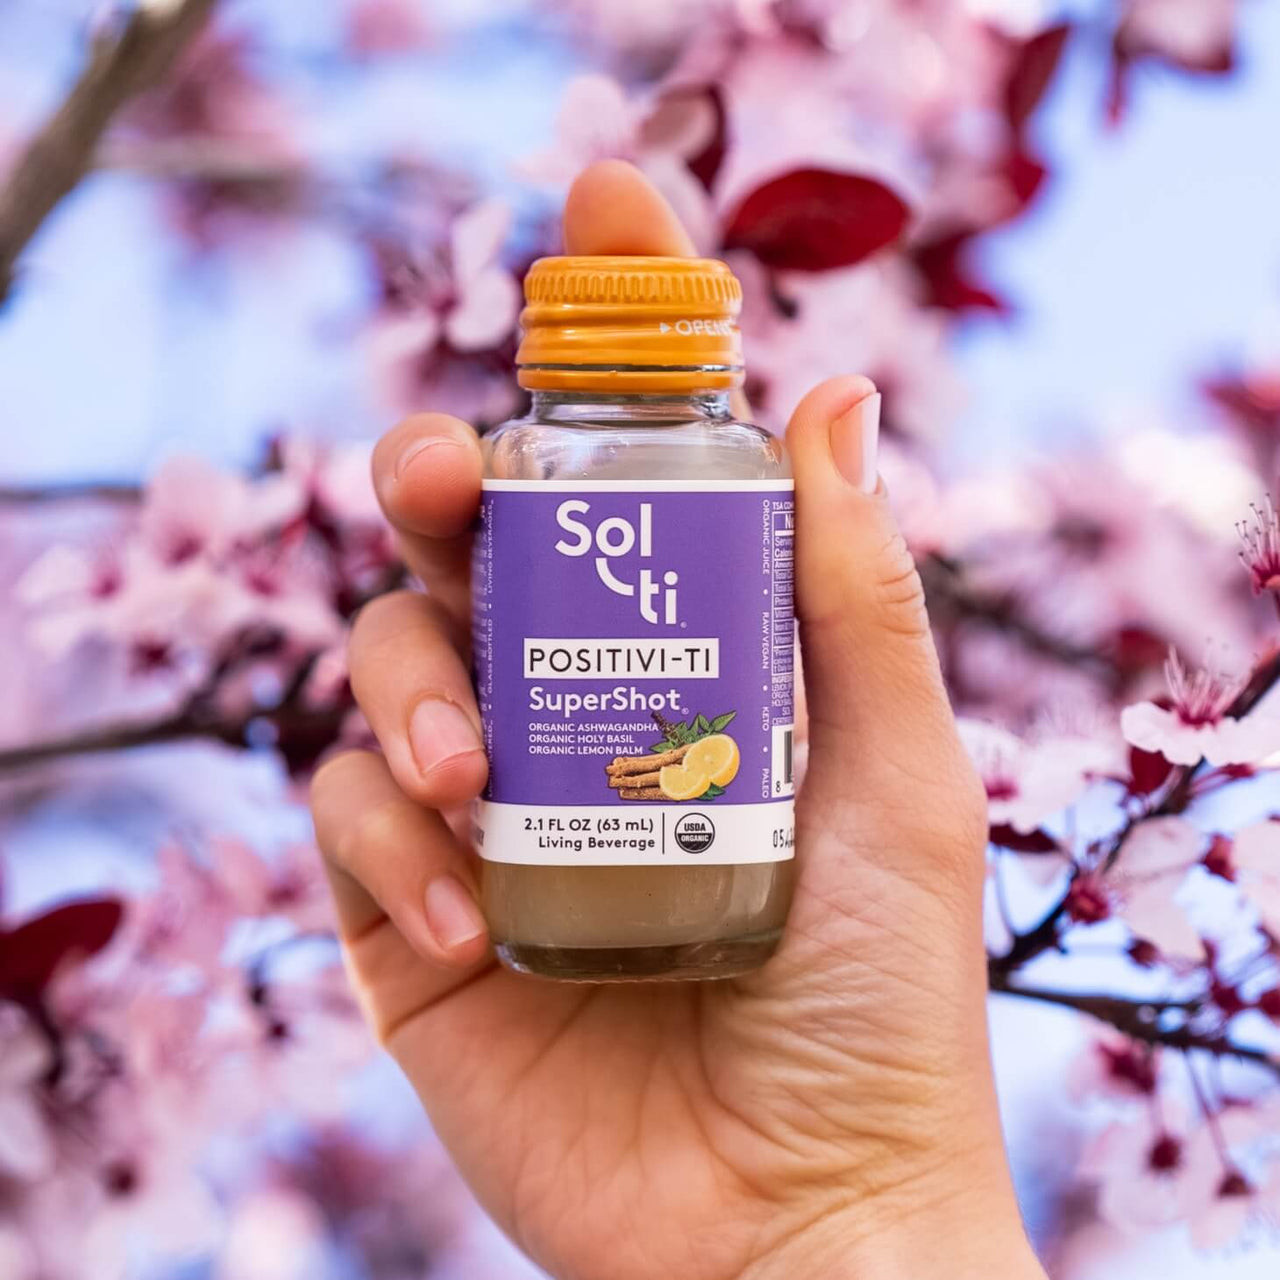 a hand holding a bottle of POSITIVI-TI SuperShot in front of cherry blossom flowers